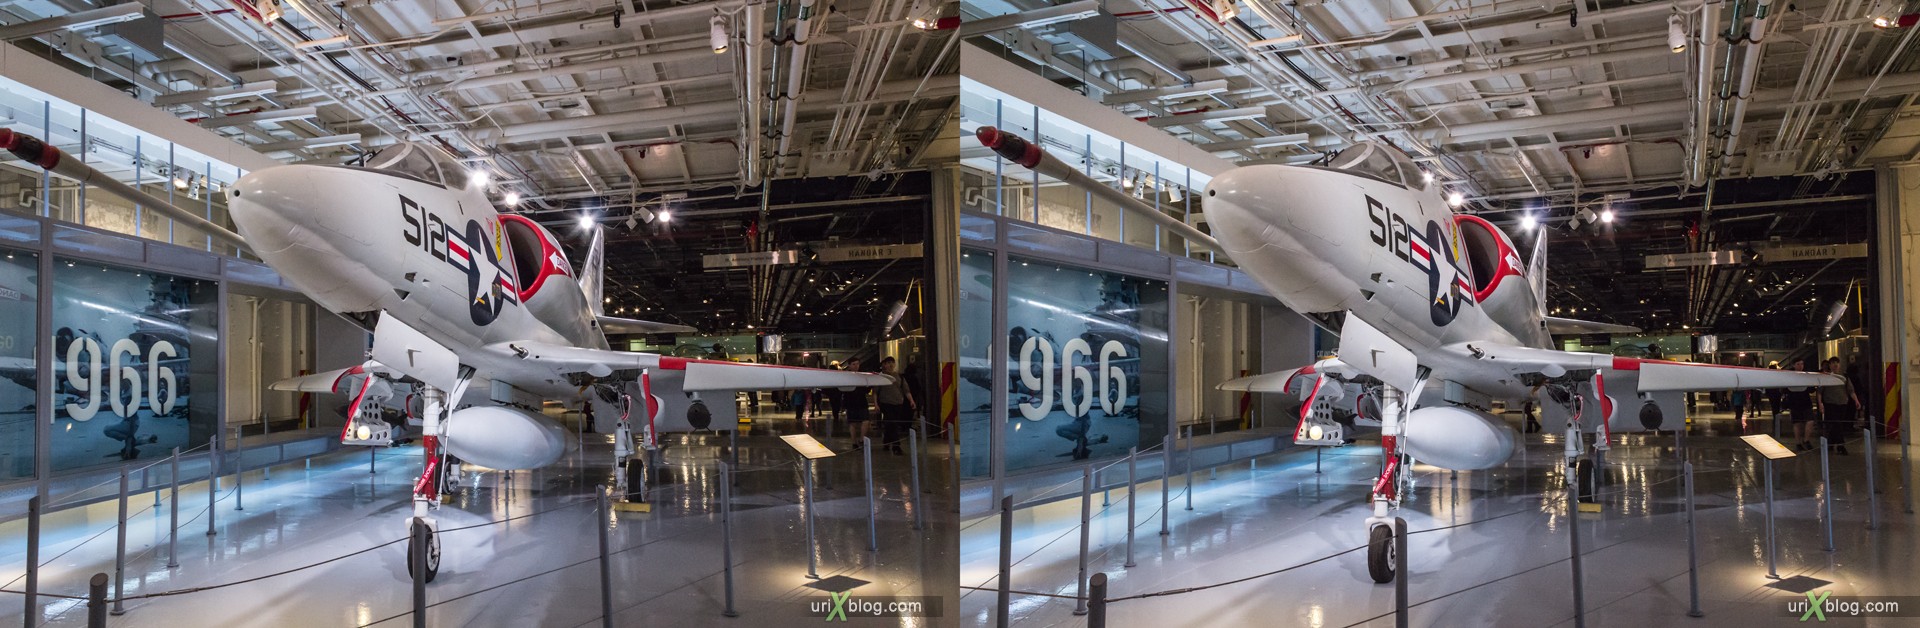 2013, USA, NYC, New York, aircraft carrier Intrepid museum, A-4 Skyhawk, sea, air, space, ship, submarine, aircraft, airplane, helicopter, military, 3D, stereo pair, cross-eyed, crossview, cross view stereo pair, stereoscopic